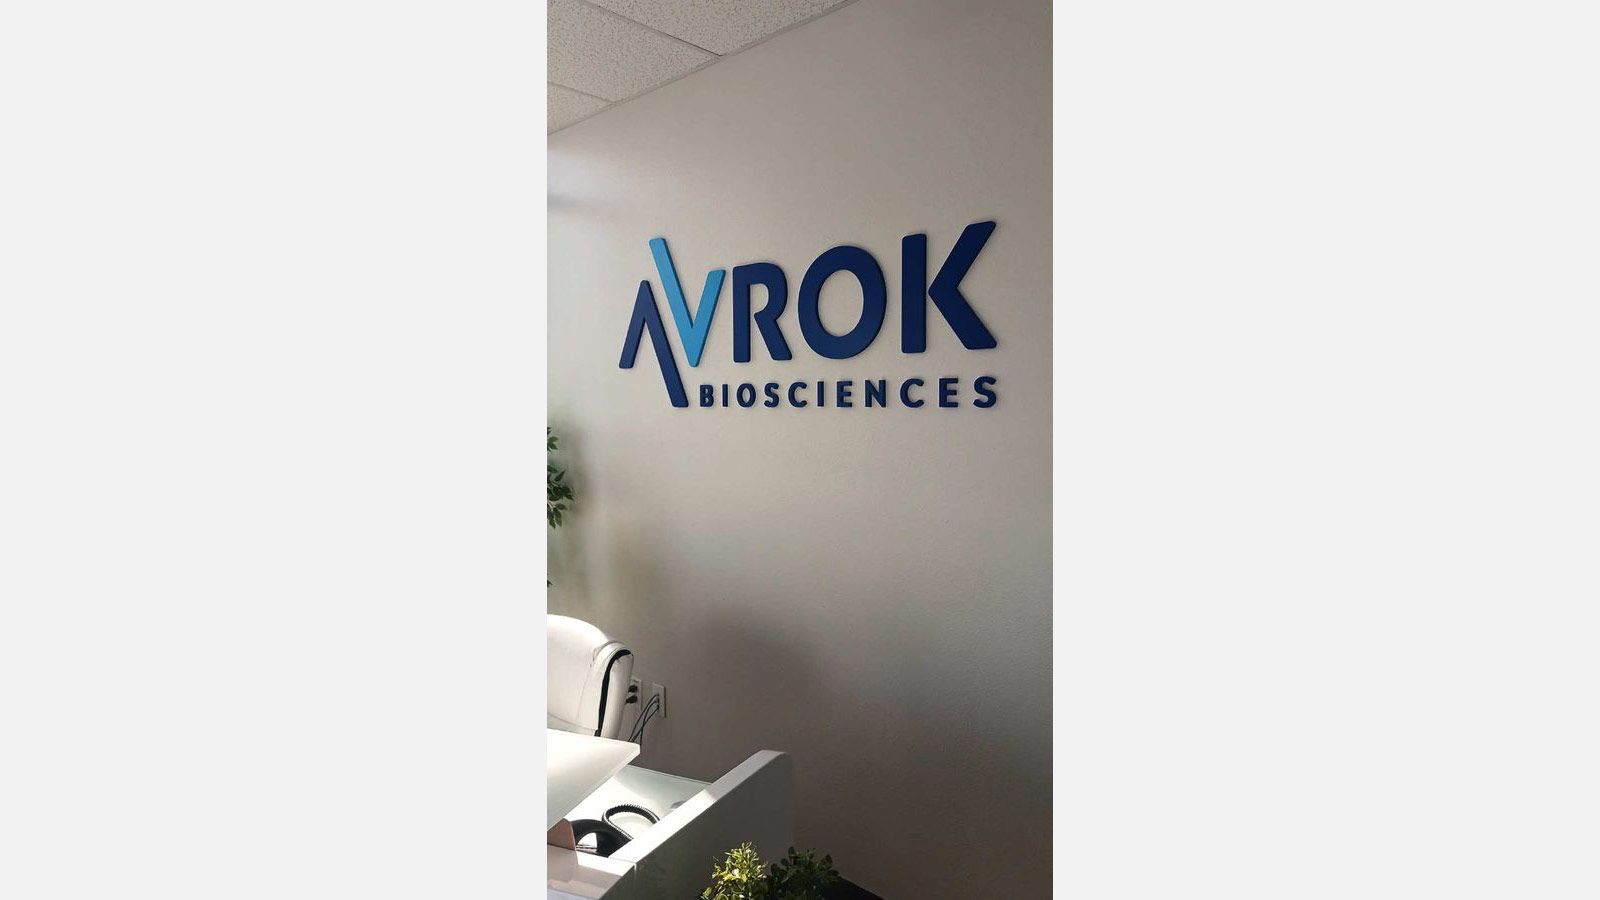 Avrok Biosciences 3D letters attached to the wall